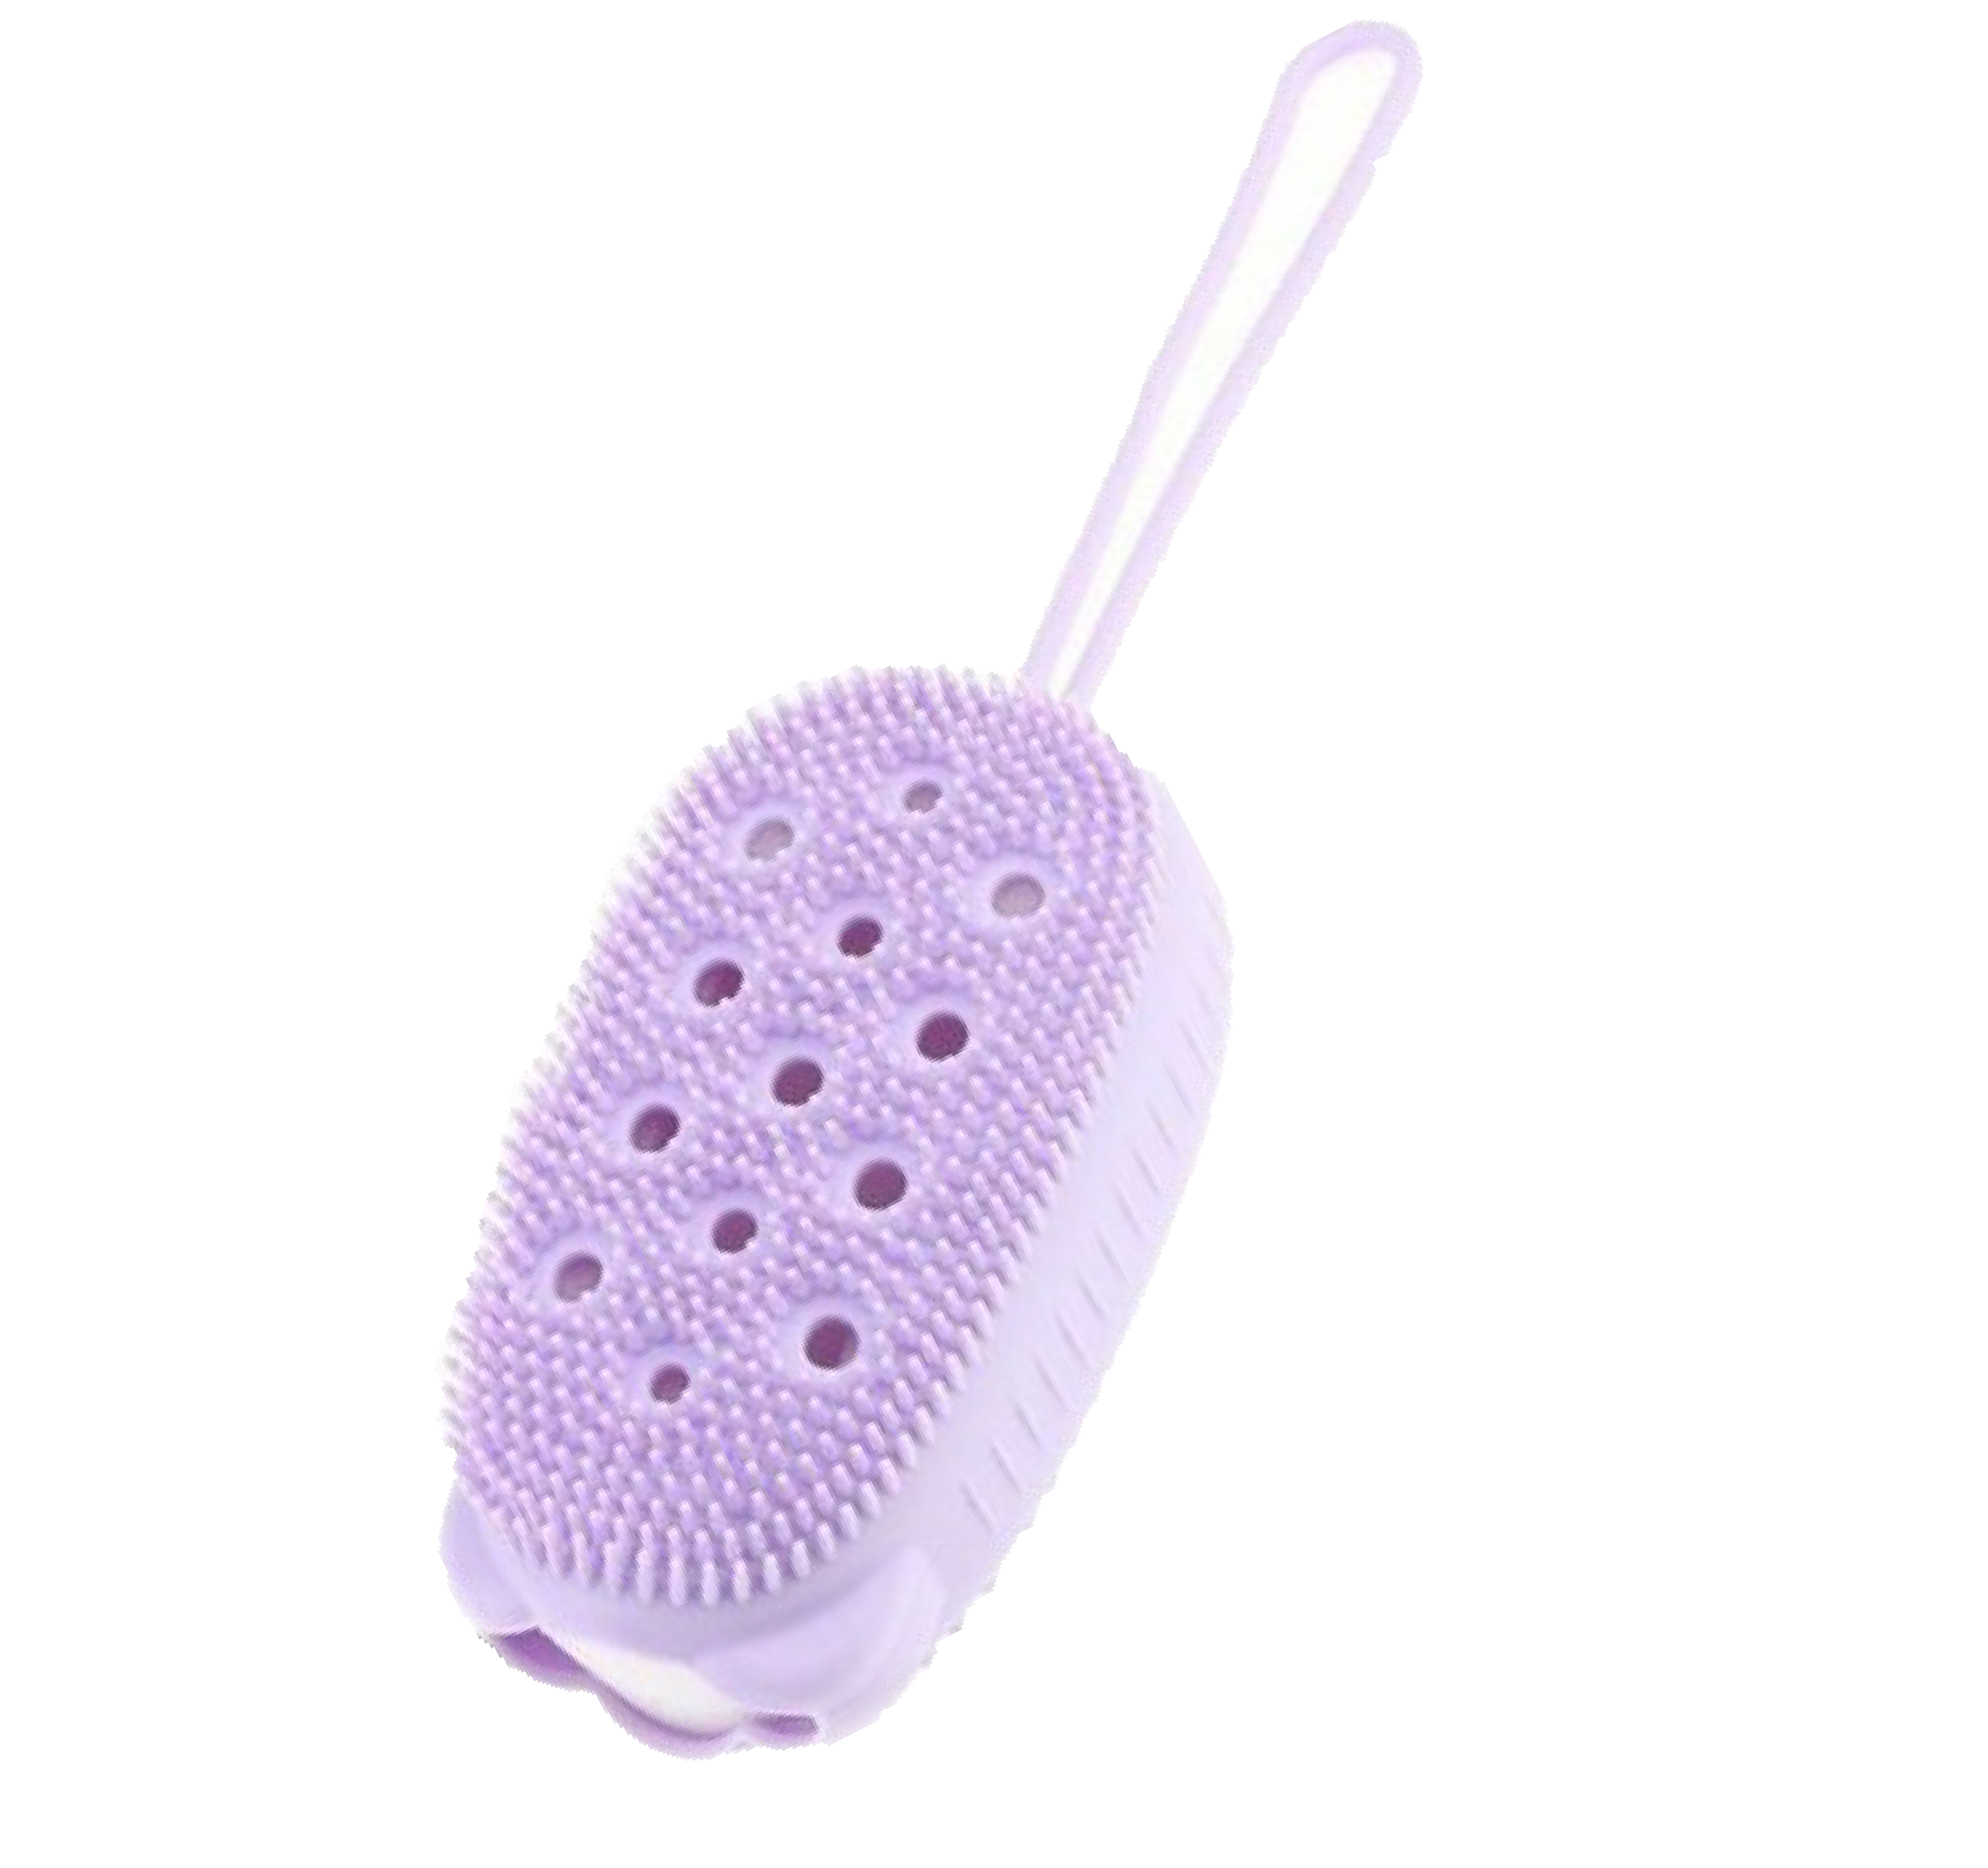 Silicone Exfoliating Body Brush Beauty & Personal Care Tools Supplier ...